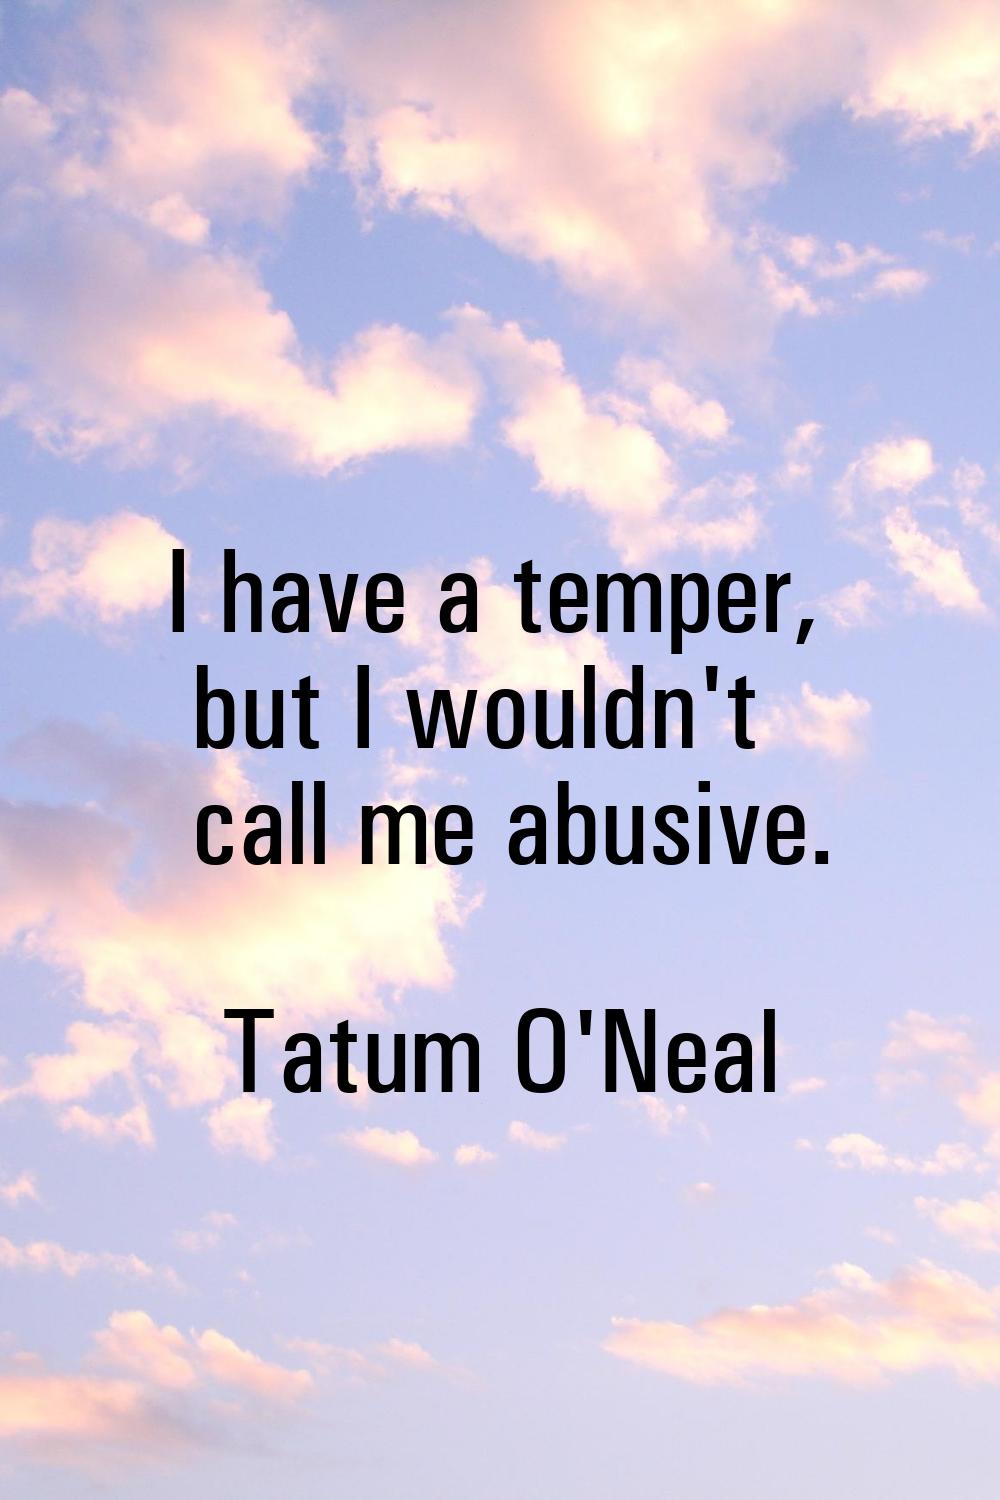 I have a temper, but I wouldn't call me abusive.